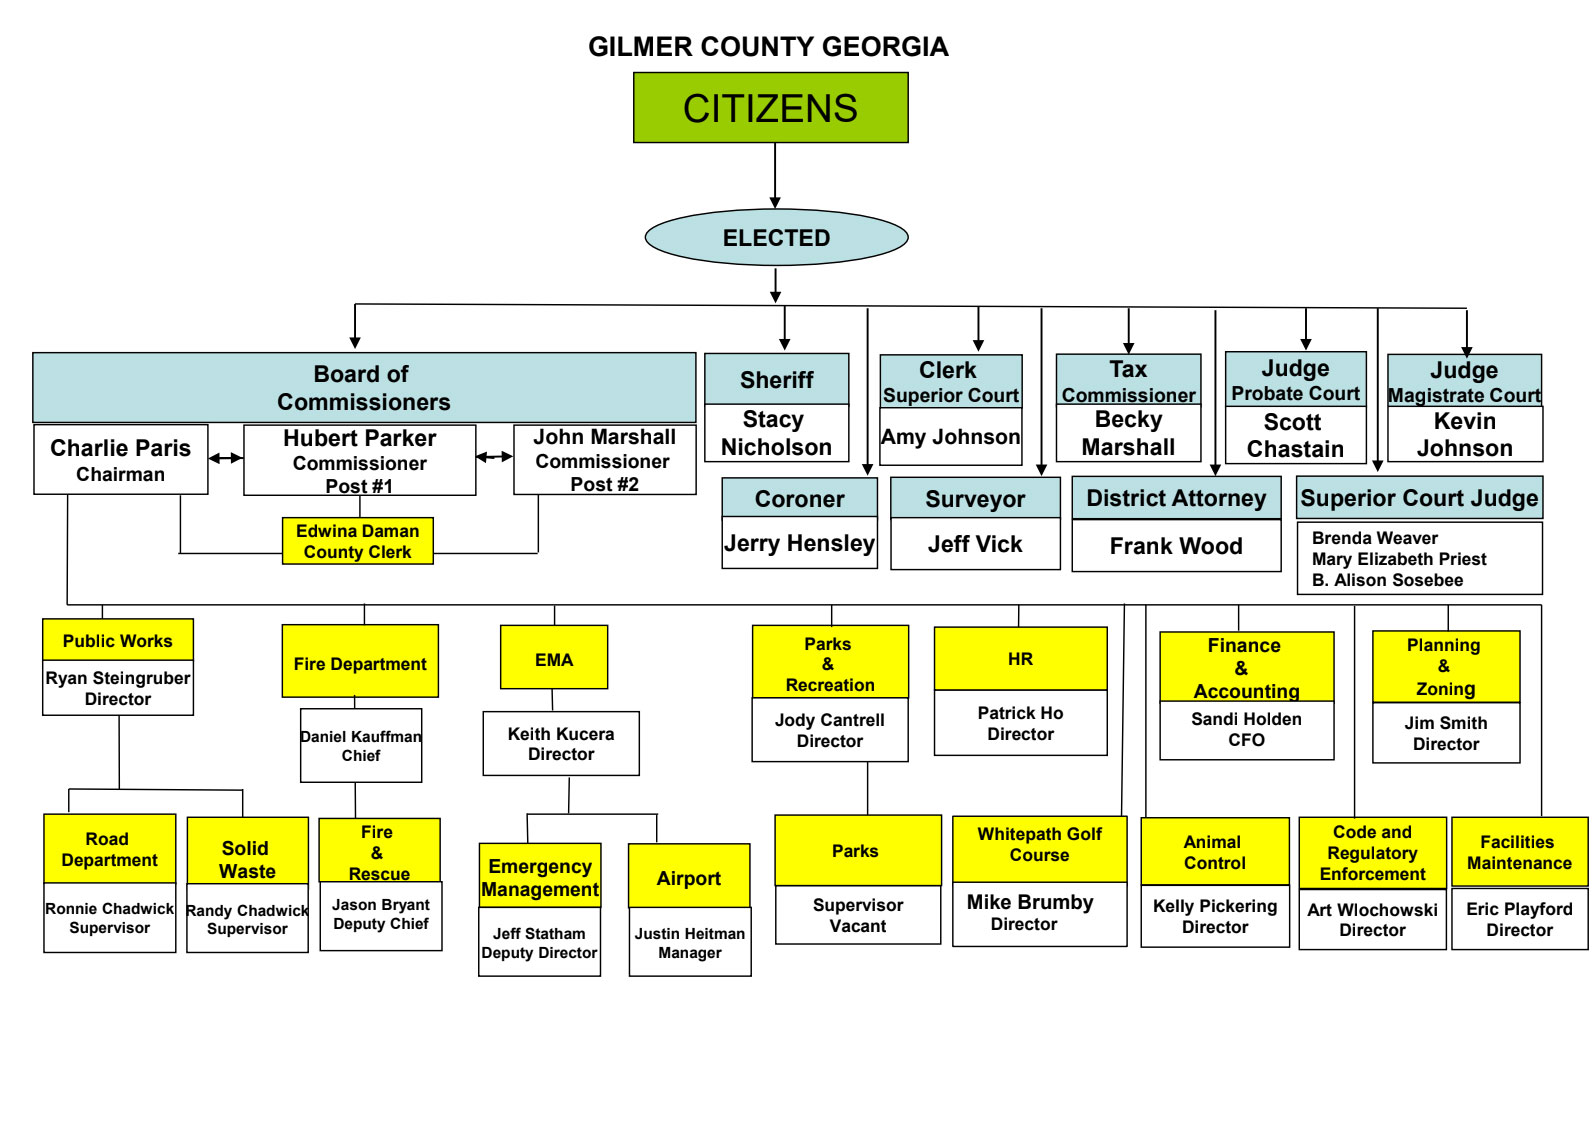 organizational chart for departments and department heads in Gilme County Georgia government